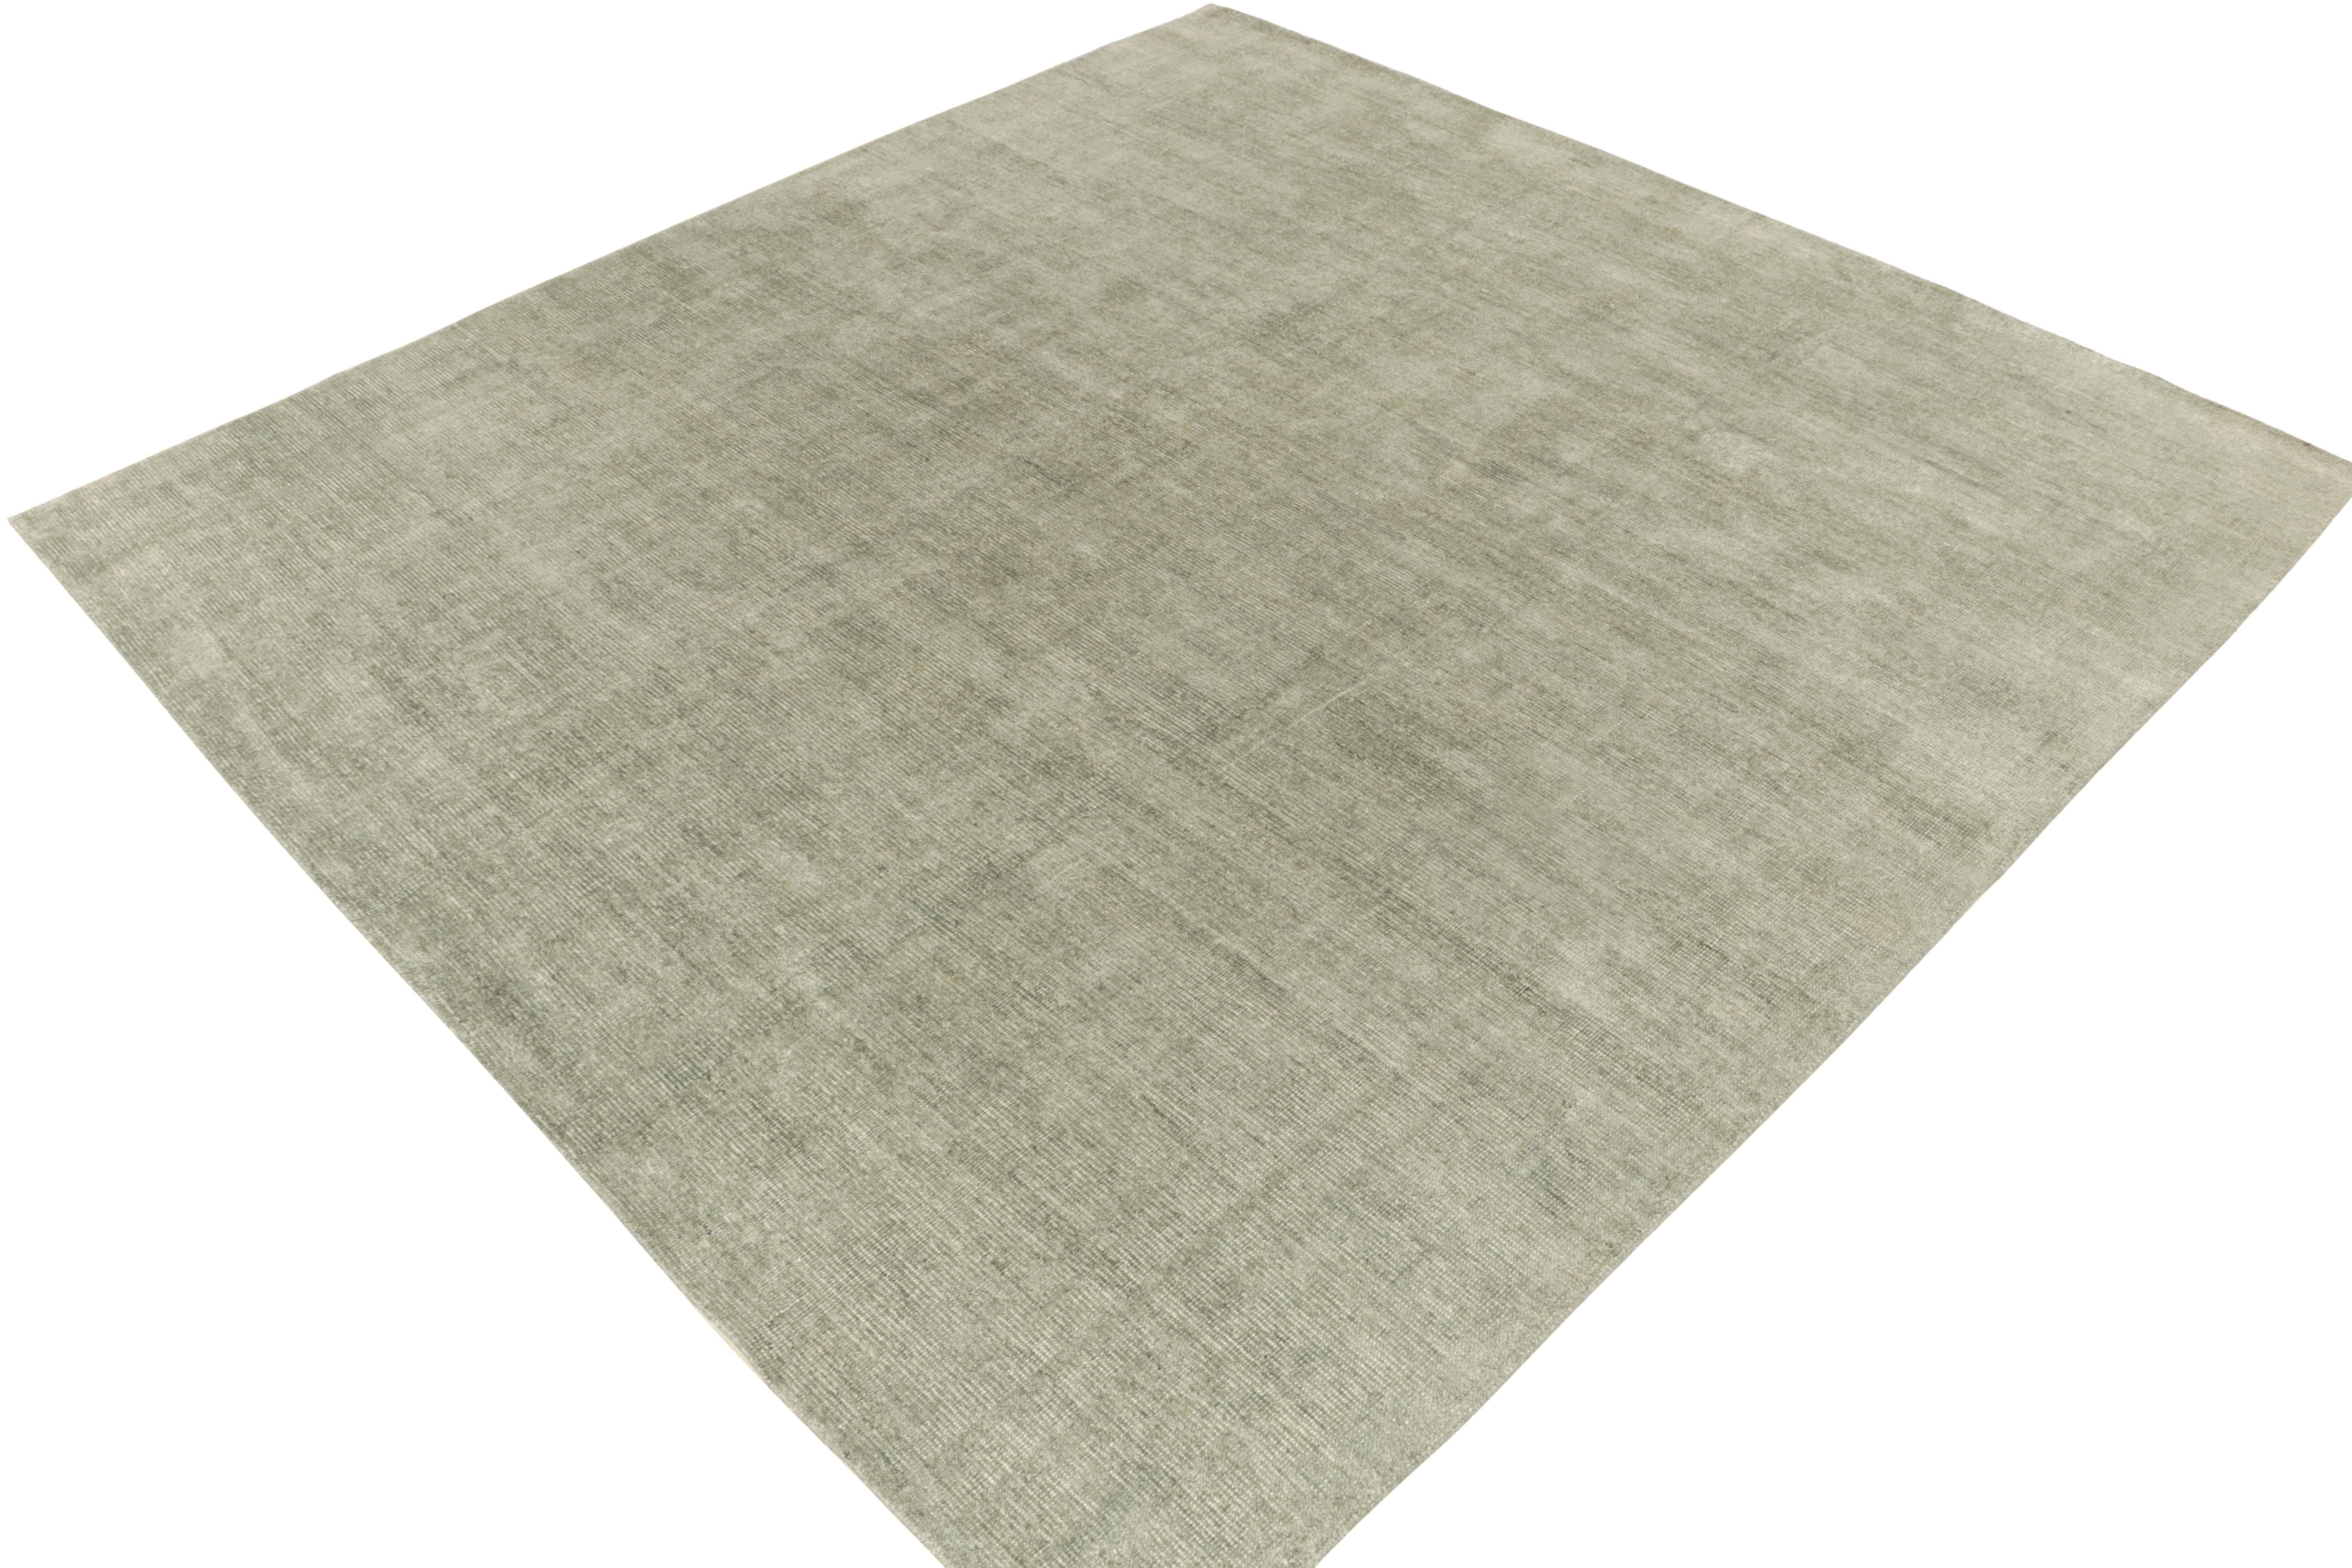 An 11x12 rug from Rug & Kilim’s contemporary Texture of Color collection. The carpet enjoys an alluring personality with light gray hues relishing pale green tones for a delicious take on colorplay. Hand-knotted in all silk with an intricate blend